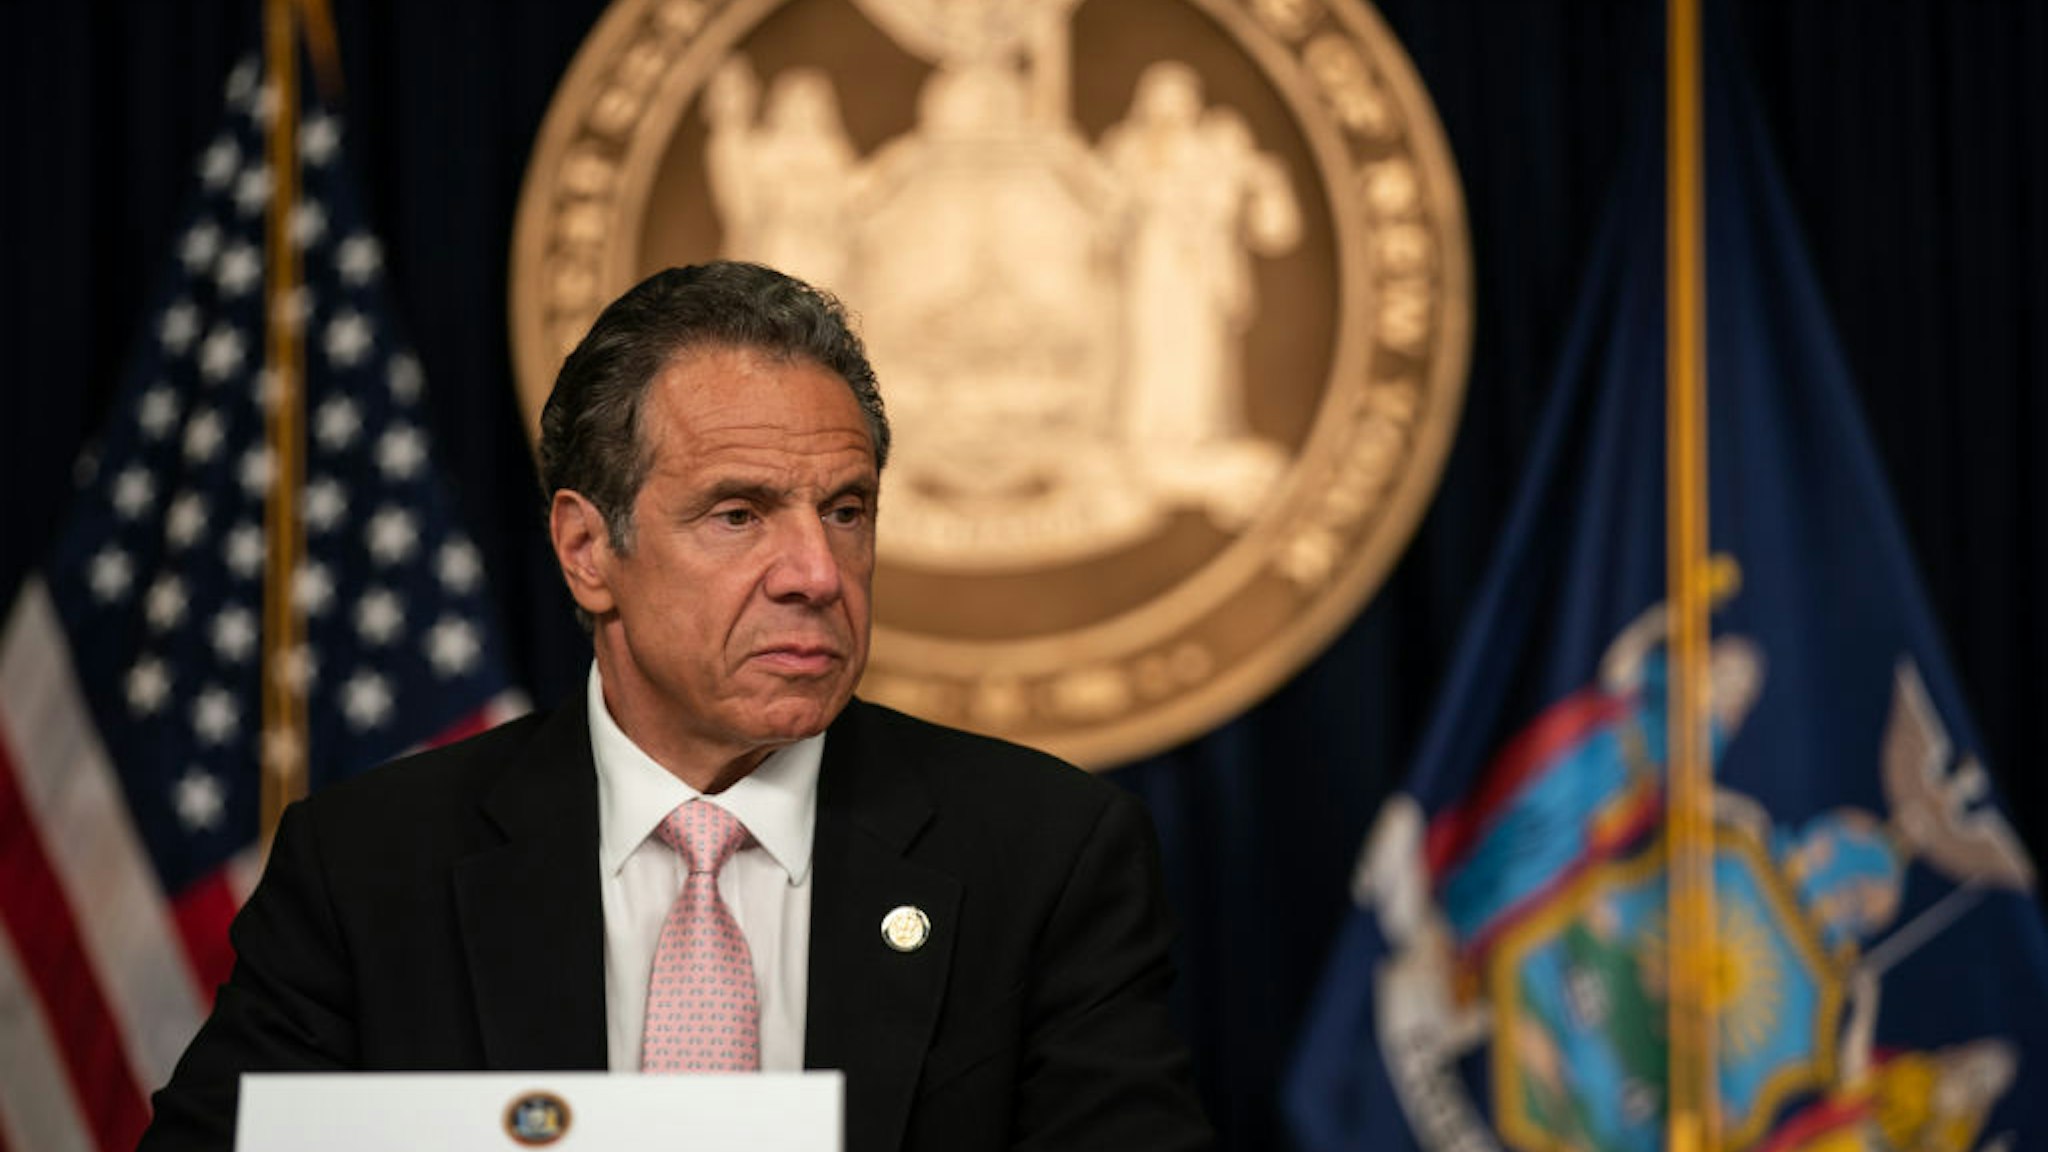 New York Gov. Andrew Cuomo speaks during the daily media briefing at the Office of the Governor of the State of New York on June 12, 2020 in New York City.